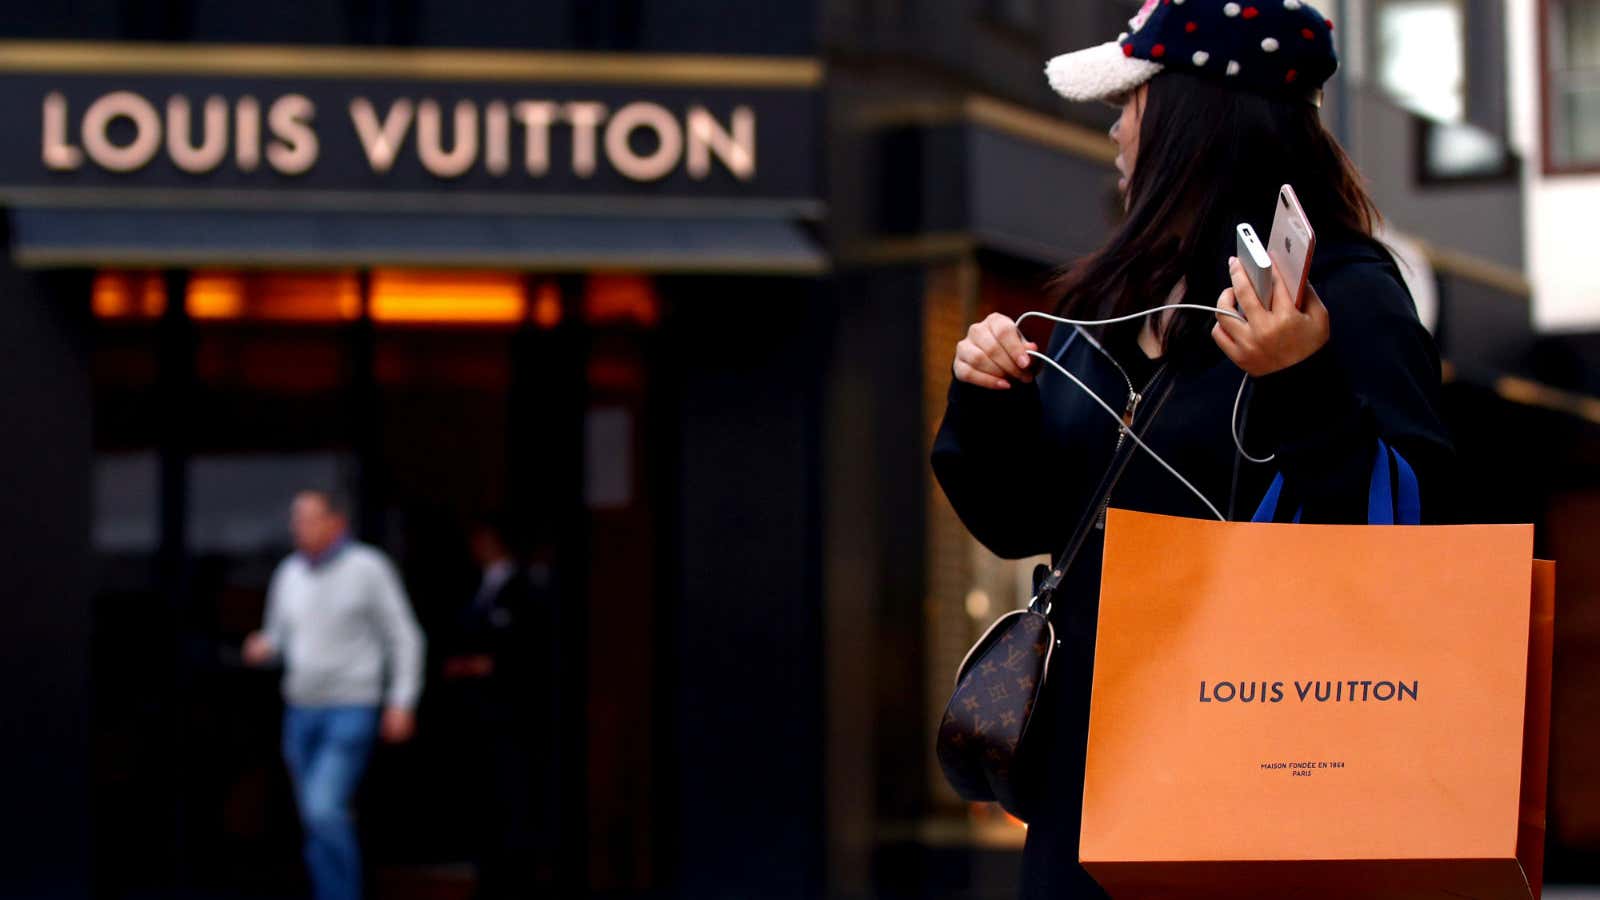 Louis Vuitton The History  Everything You Didnt Know About The Brand